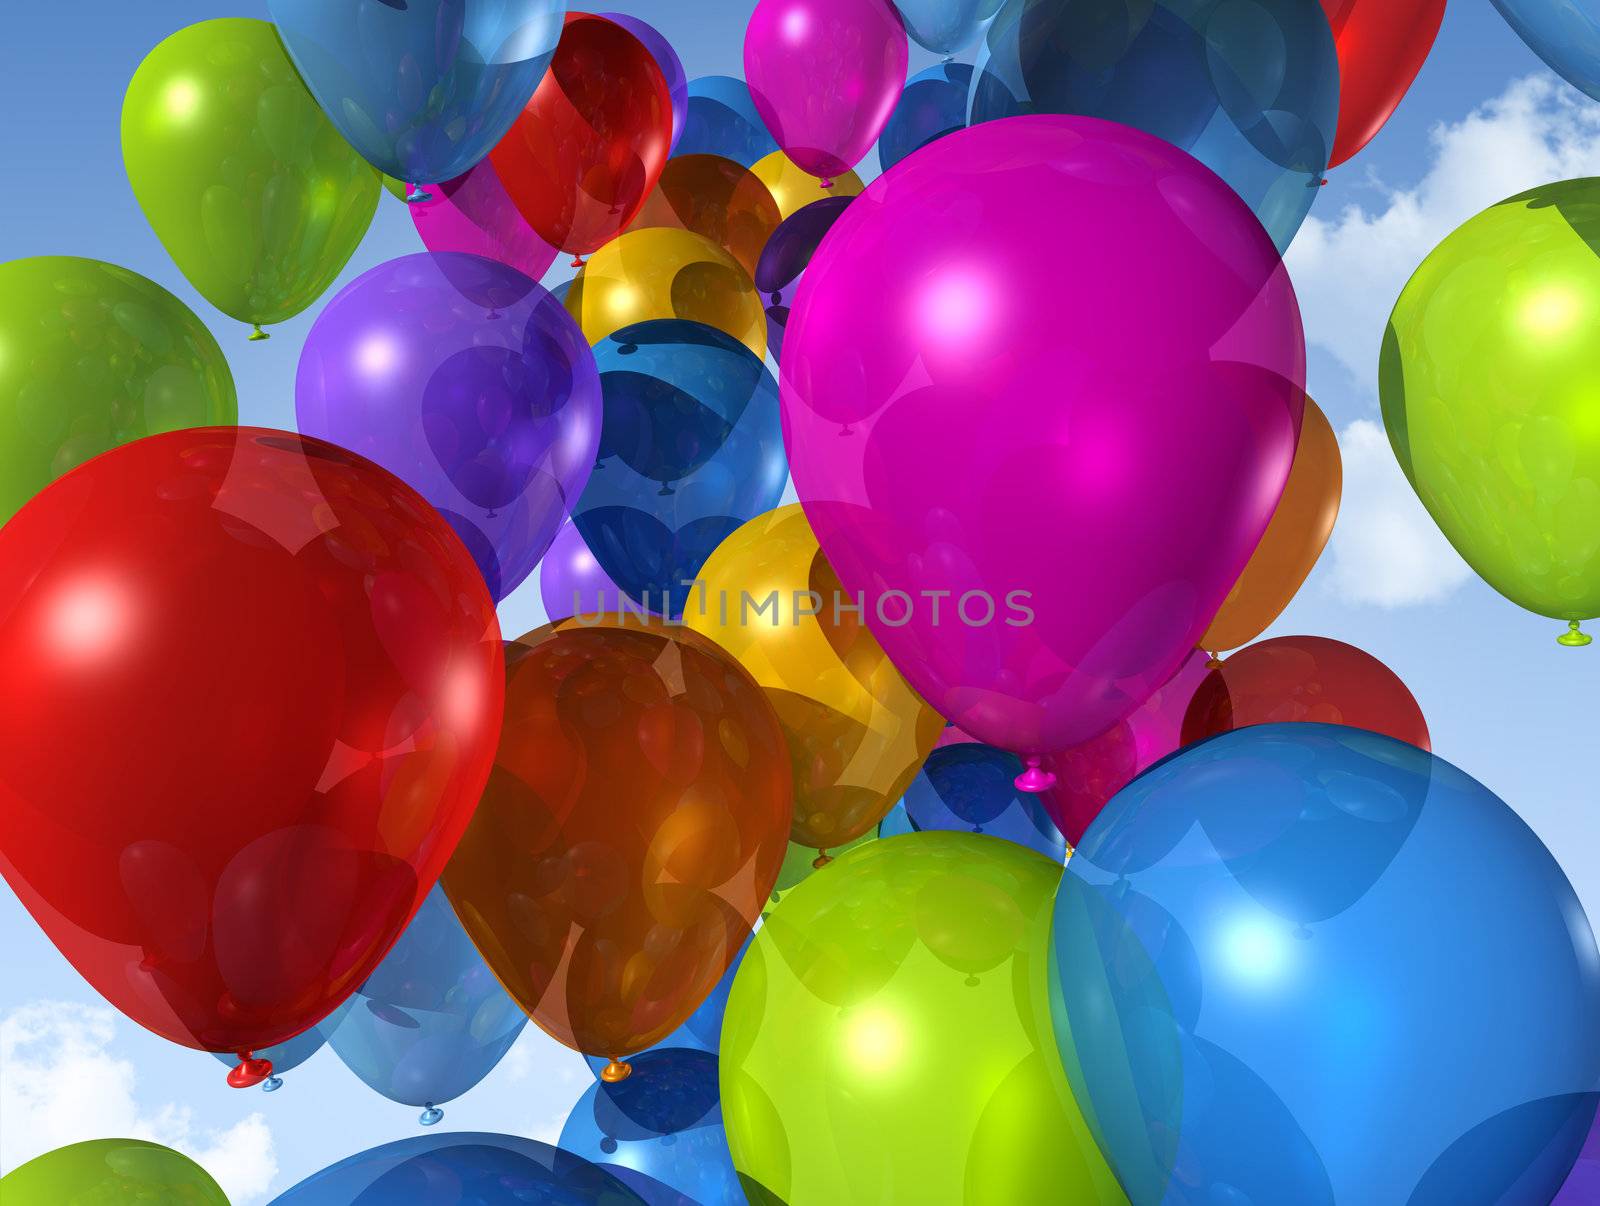 colored balloons on a blue sky by daboost